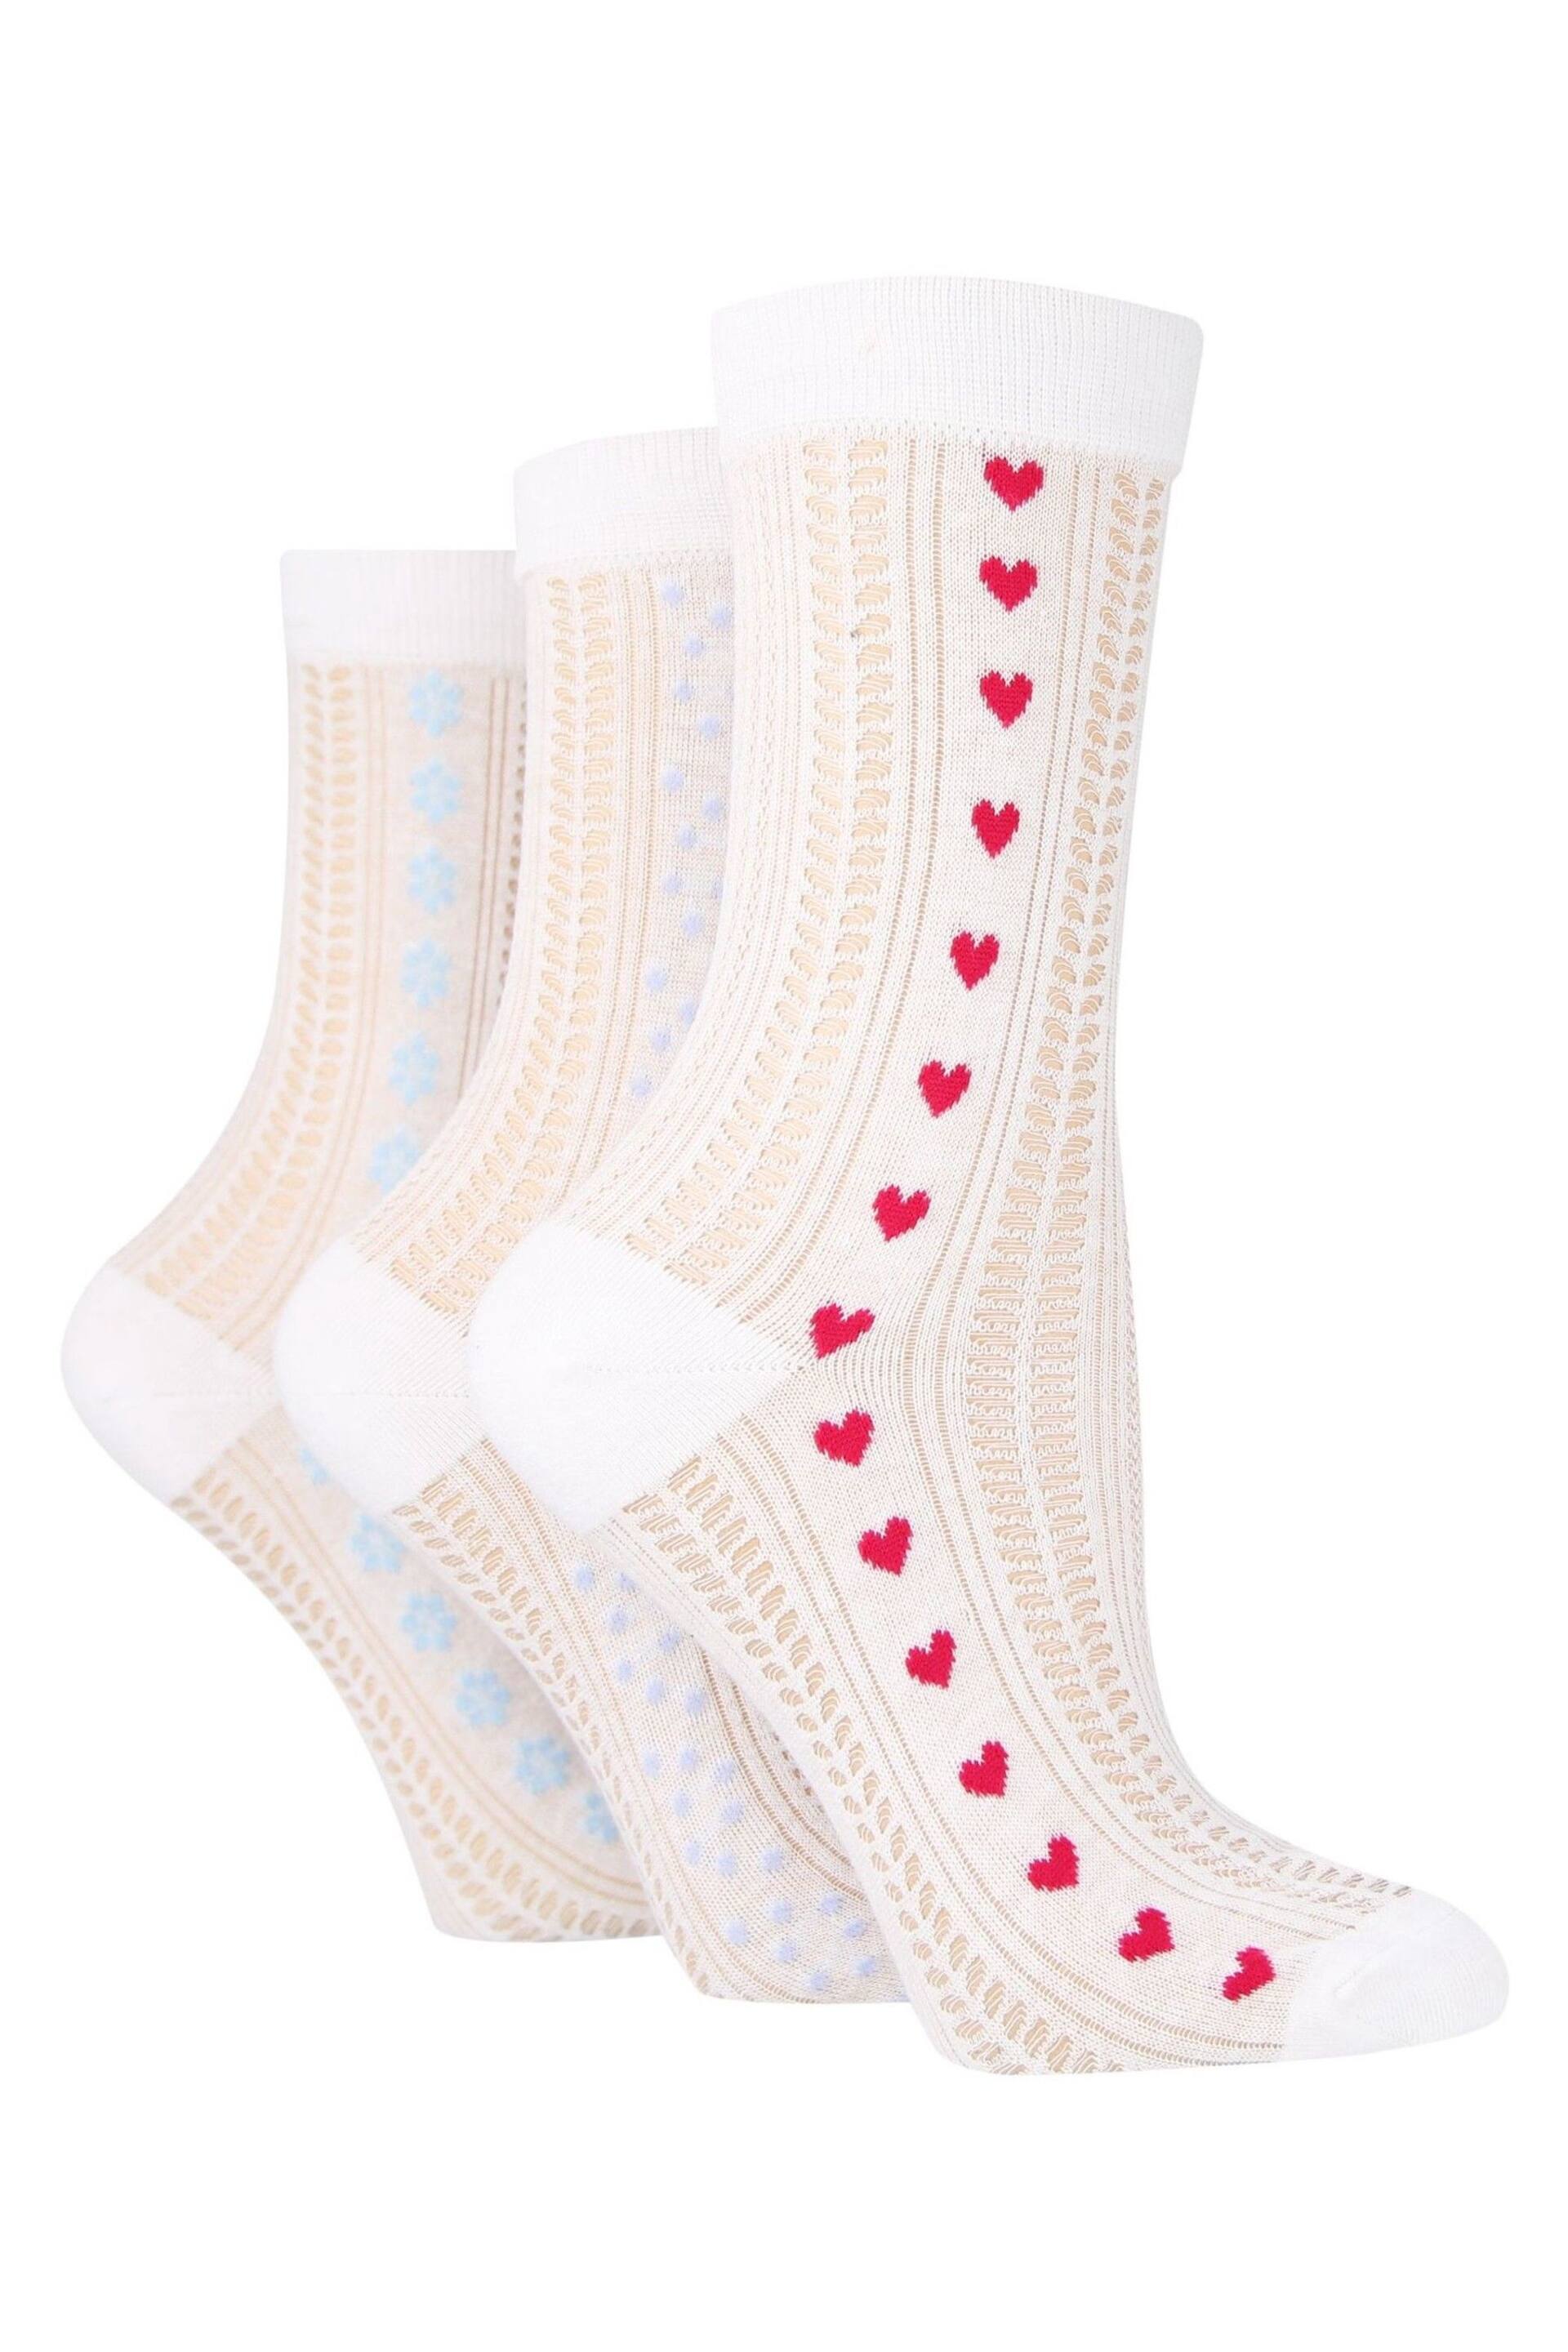 Wild Feet White Cropped Fancy Ankle Socks 3 Pack - Image 1 of 4